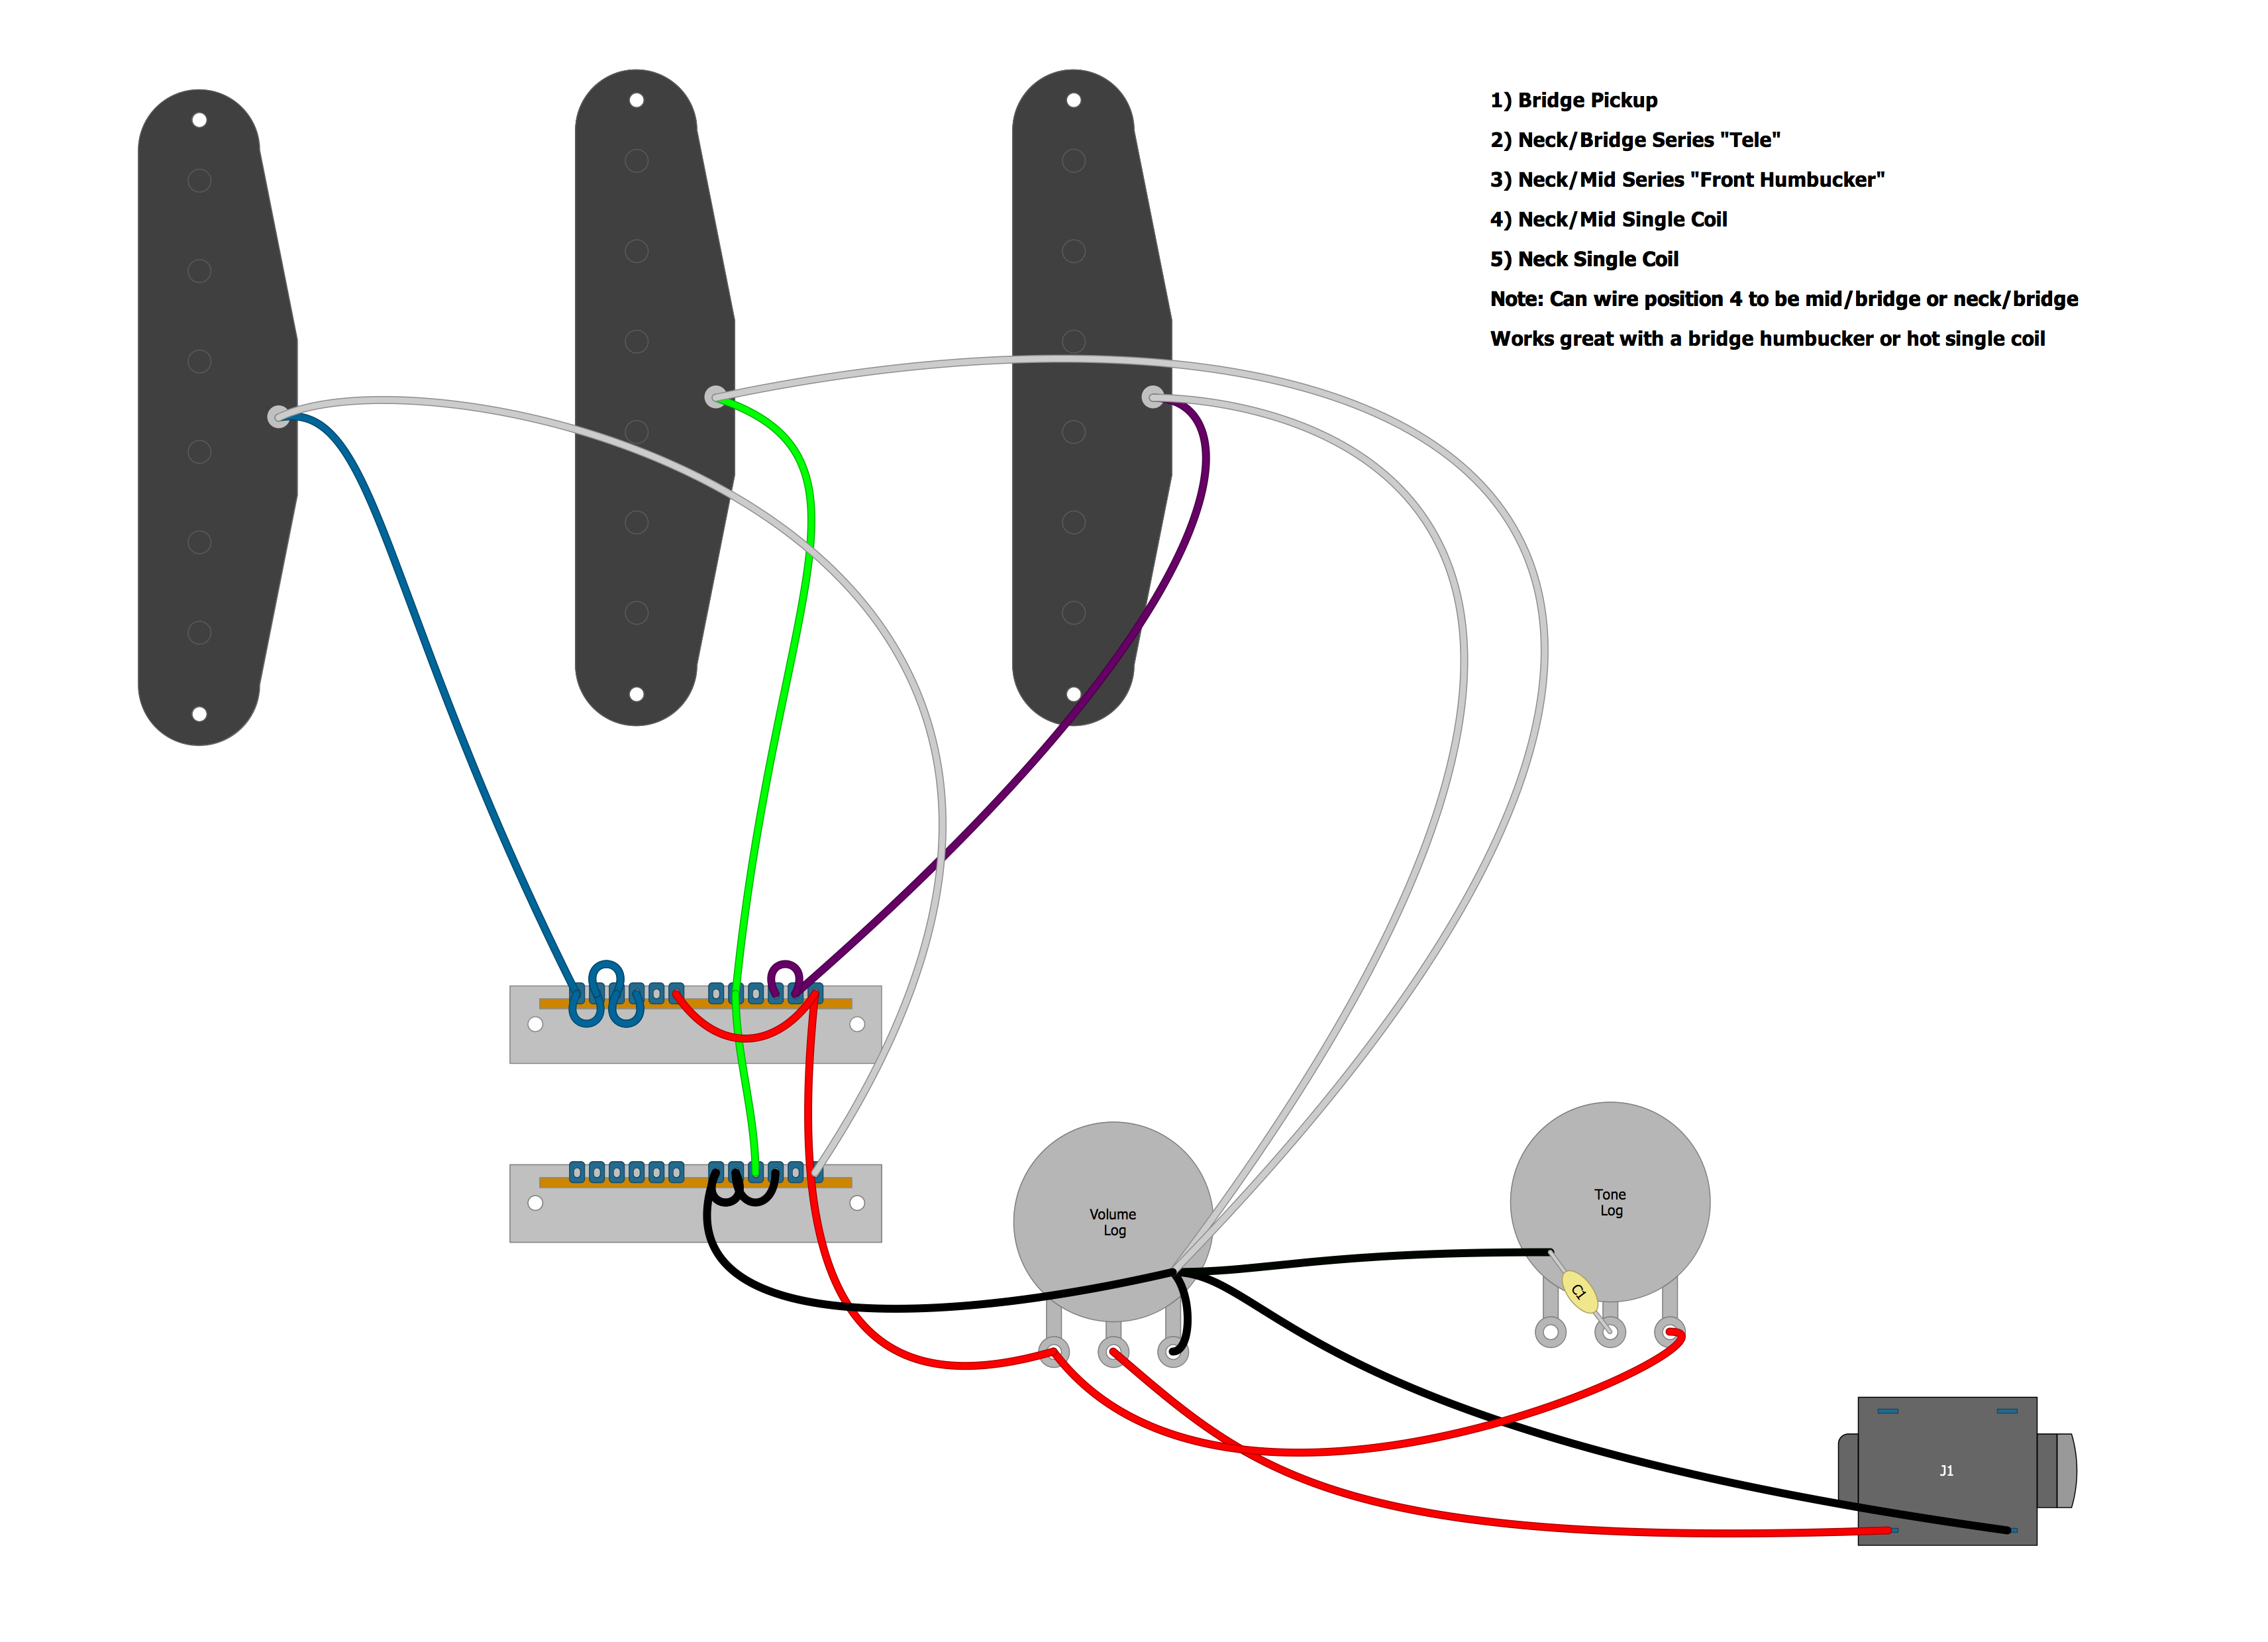 Guitar Wiring Diagram 2 Humbuckers Superswitch from jameslow.com